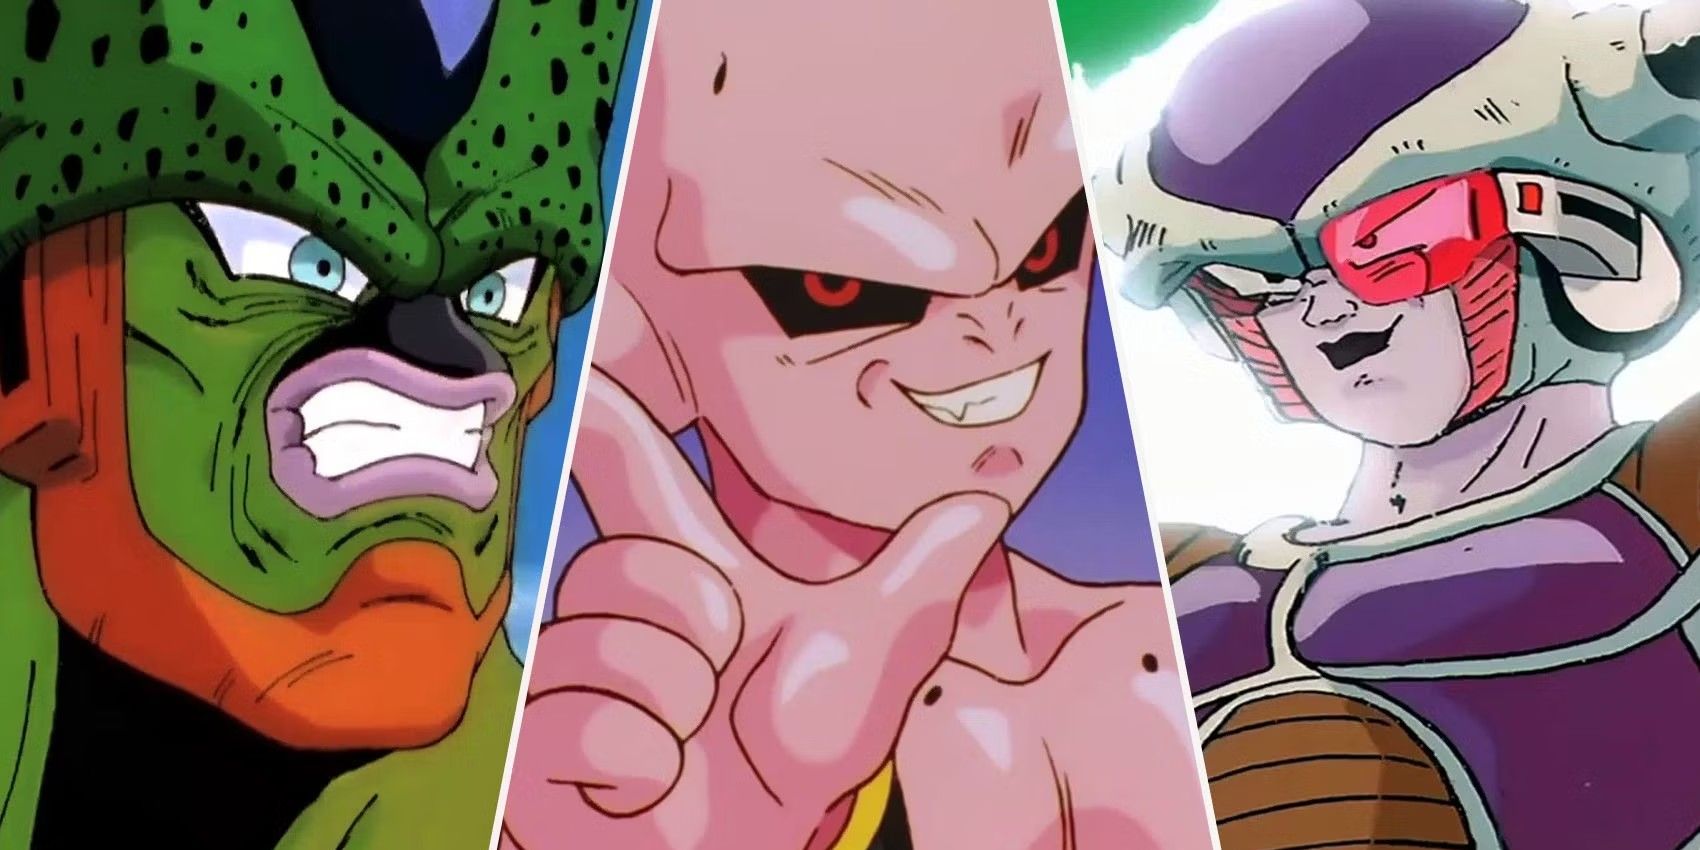 Imperfect Cell, Kid Buu, and base form Frieza together staring in splitscreen.